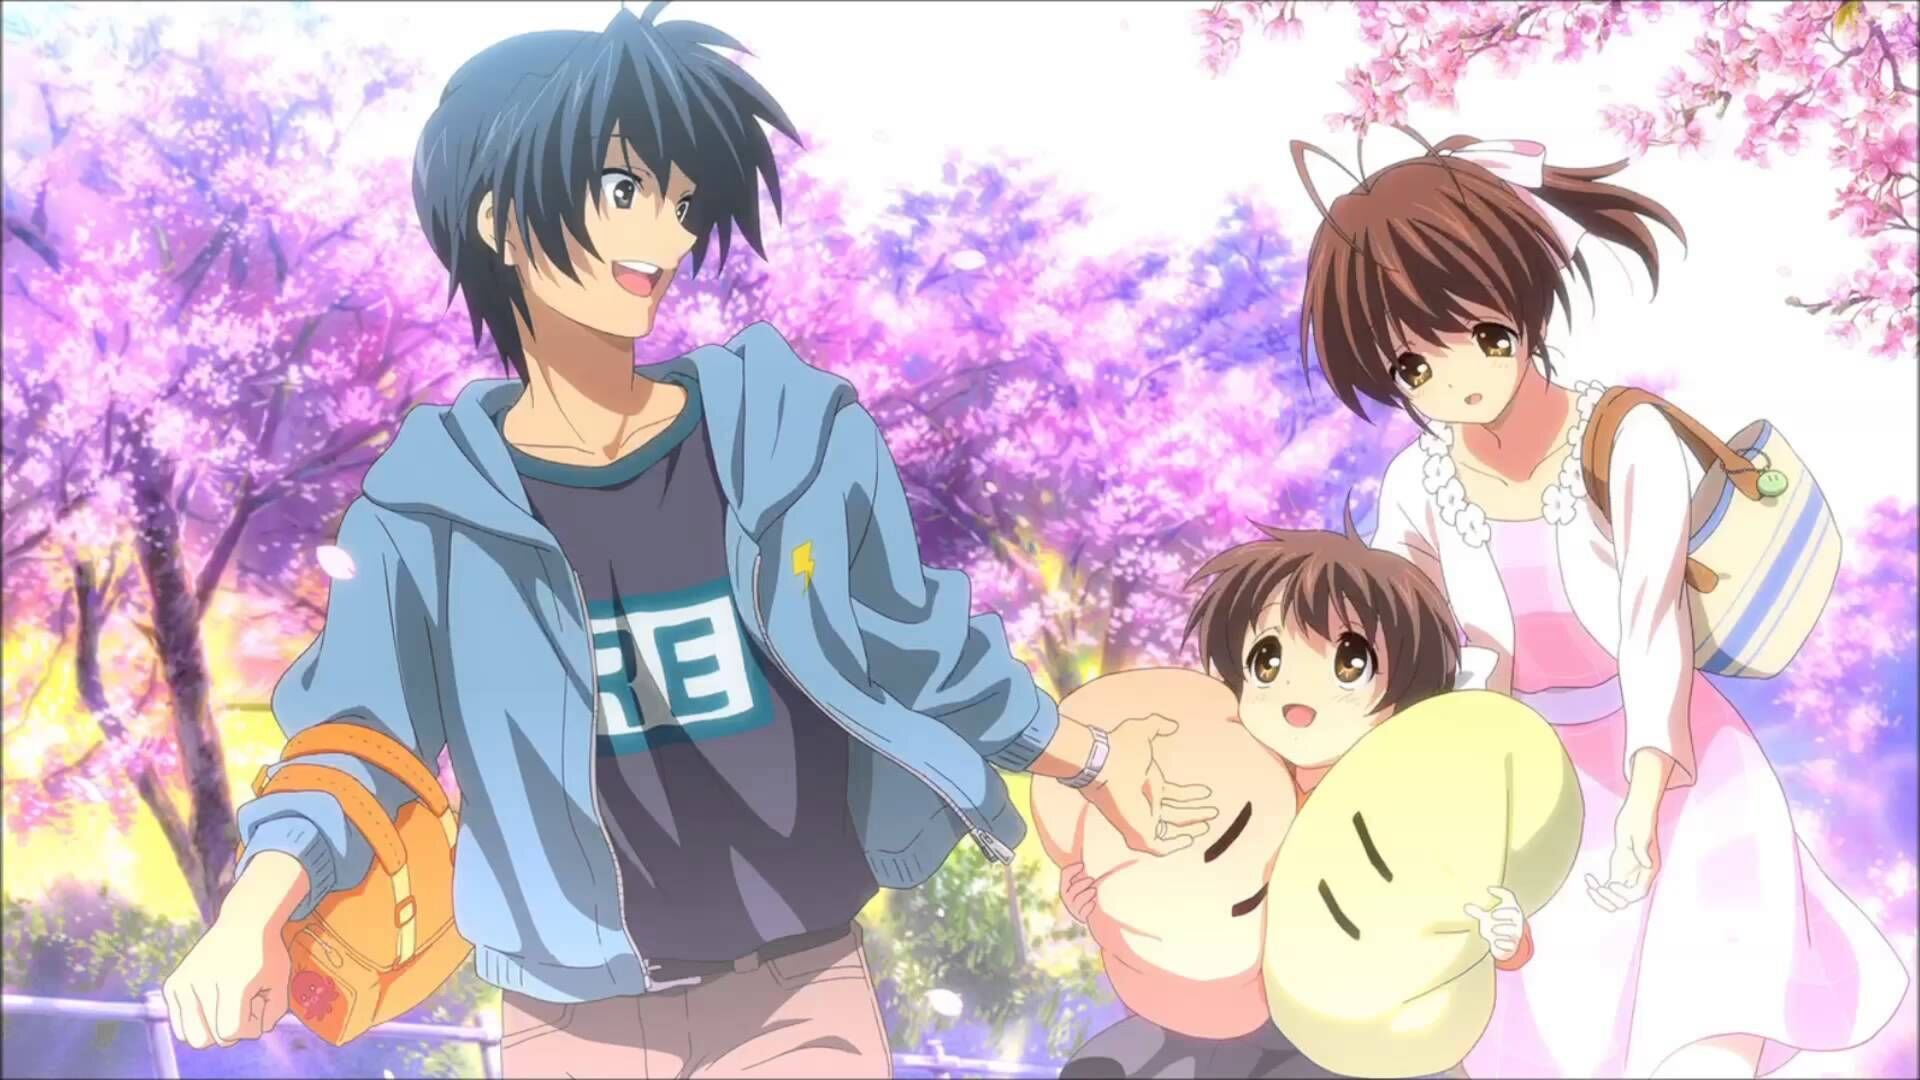 sakuga analysis] Ushio from Clannad is a well-animated character –